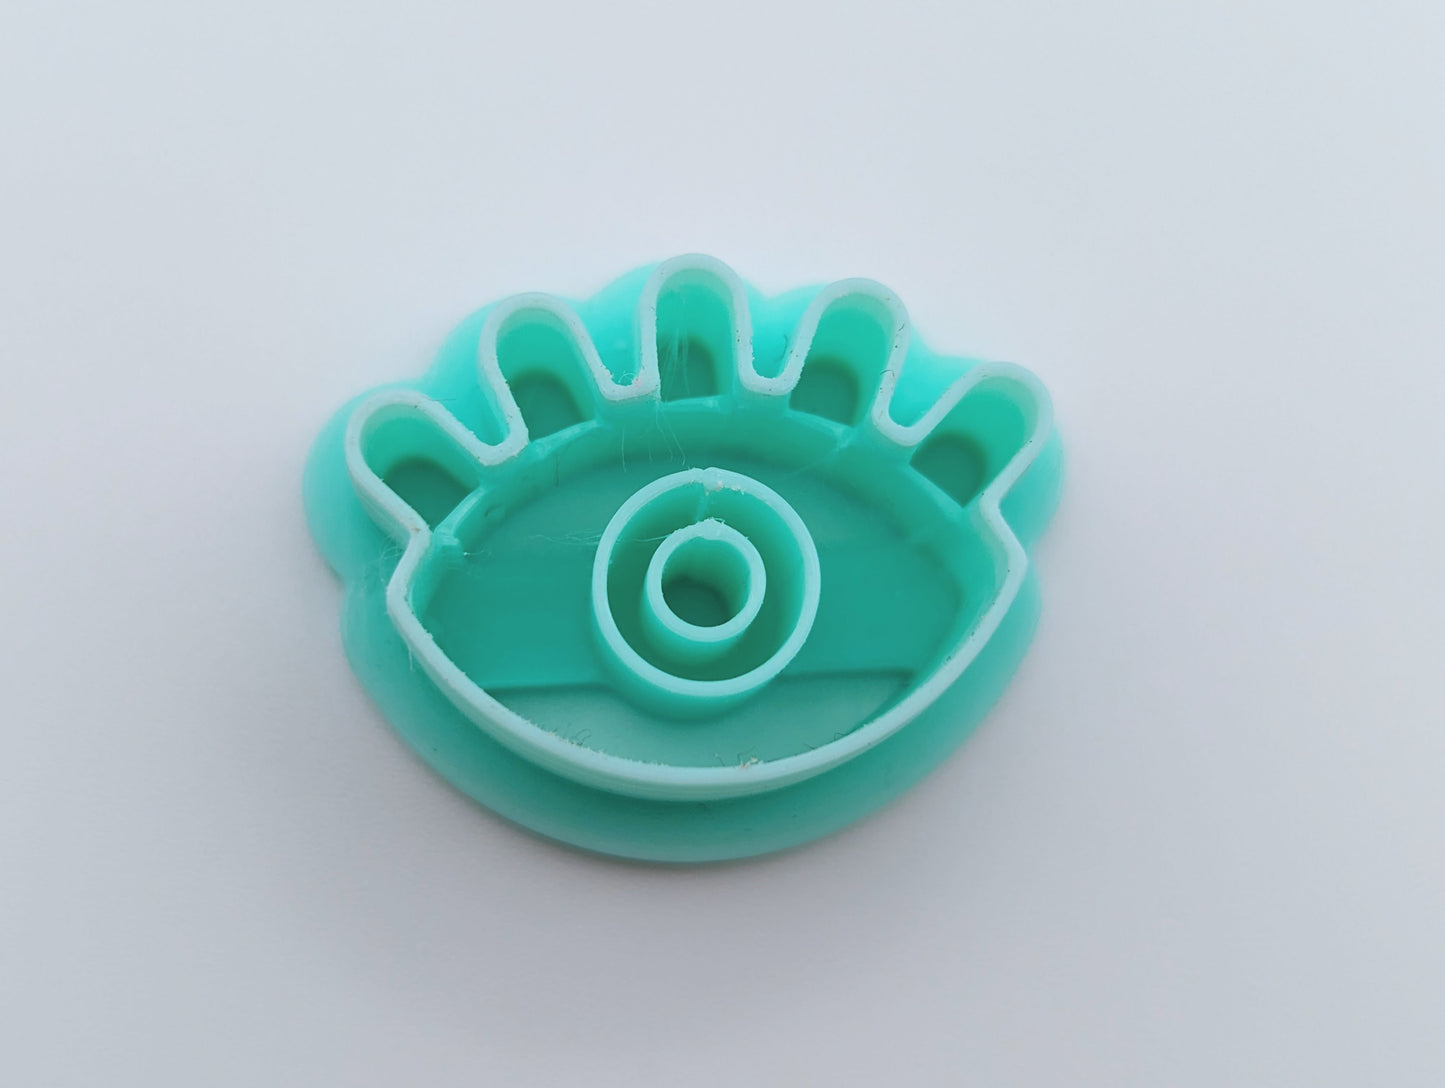 Eye with lashes, Polymer Clay jewellery Cutter